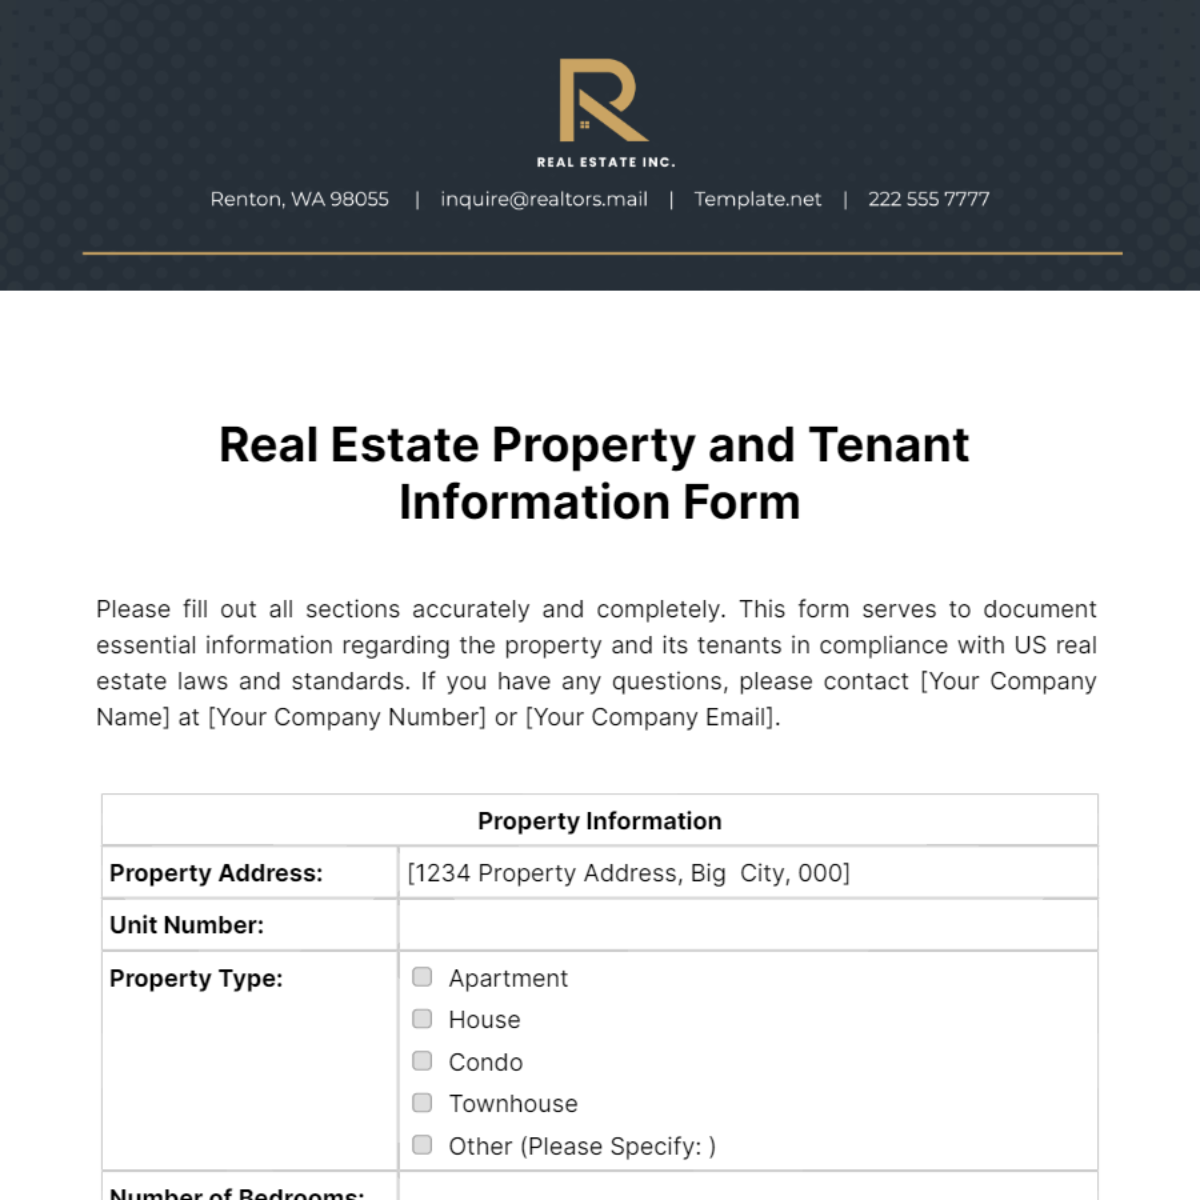 Real Estate Property and Tenant Information Form Template